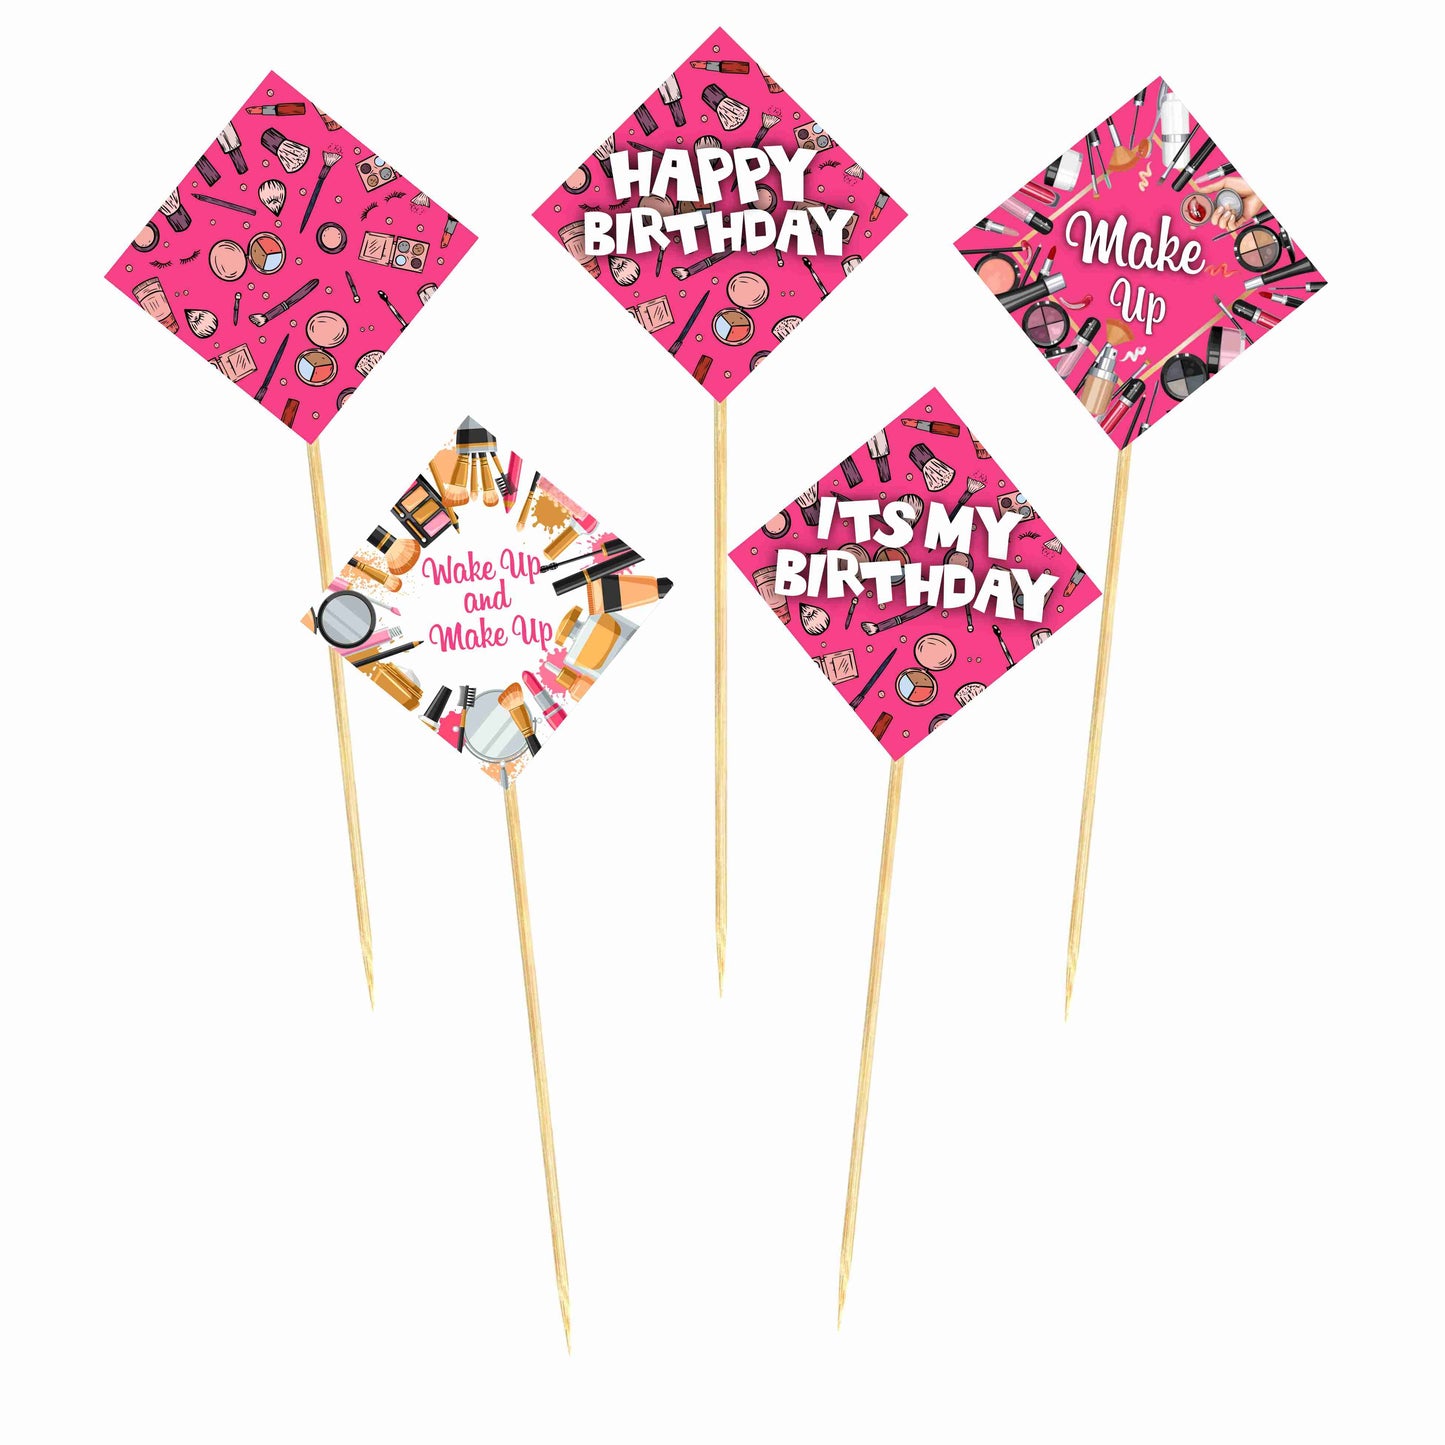 Make Up Theme Cake Topper Pack of 10 Nos for Birthday Cake Decoration Theme Party Item For Boys Girls Adults Birthday Theme Decor